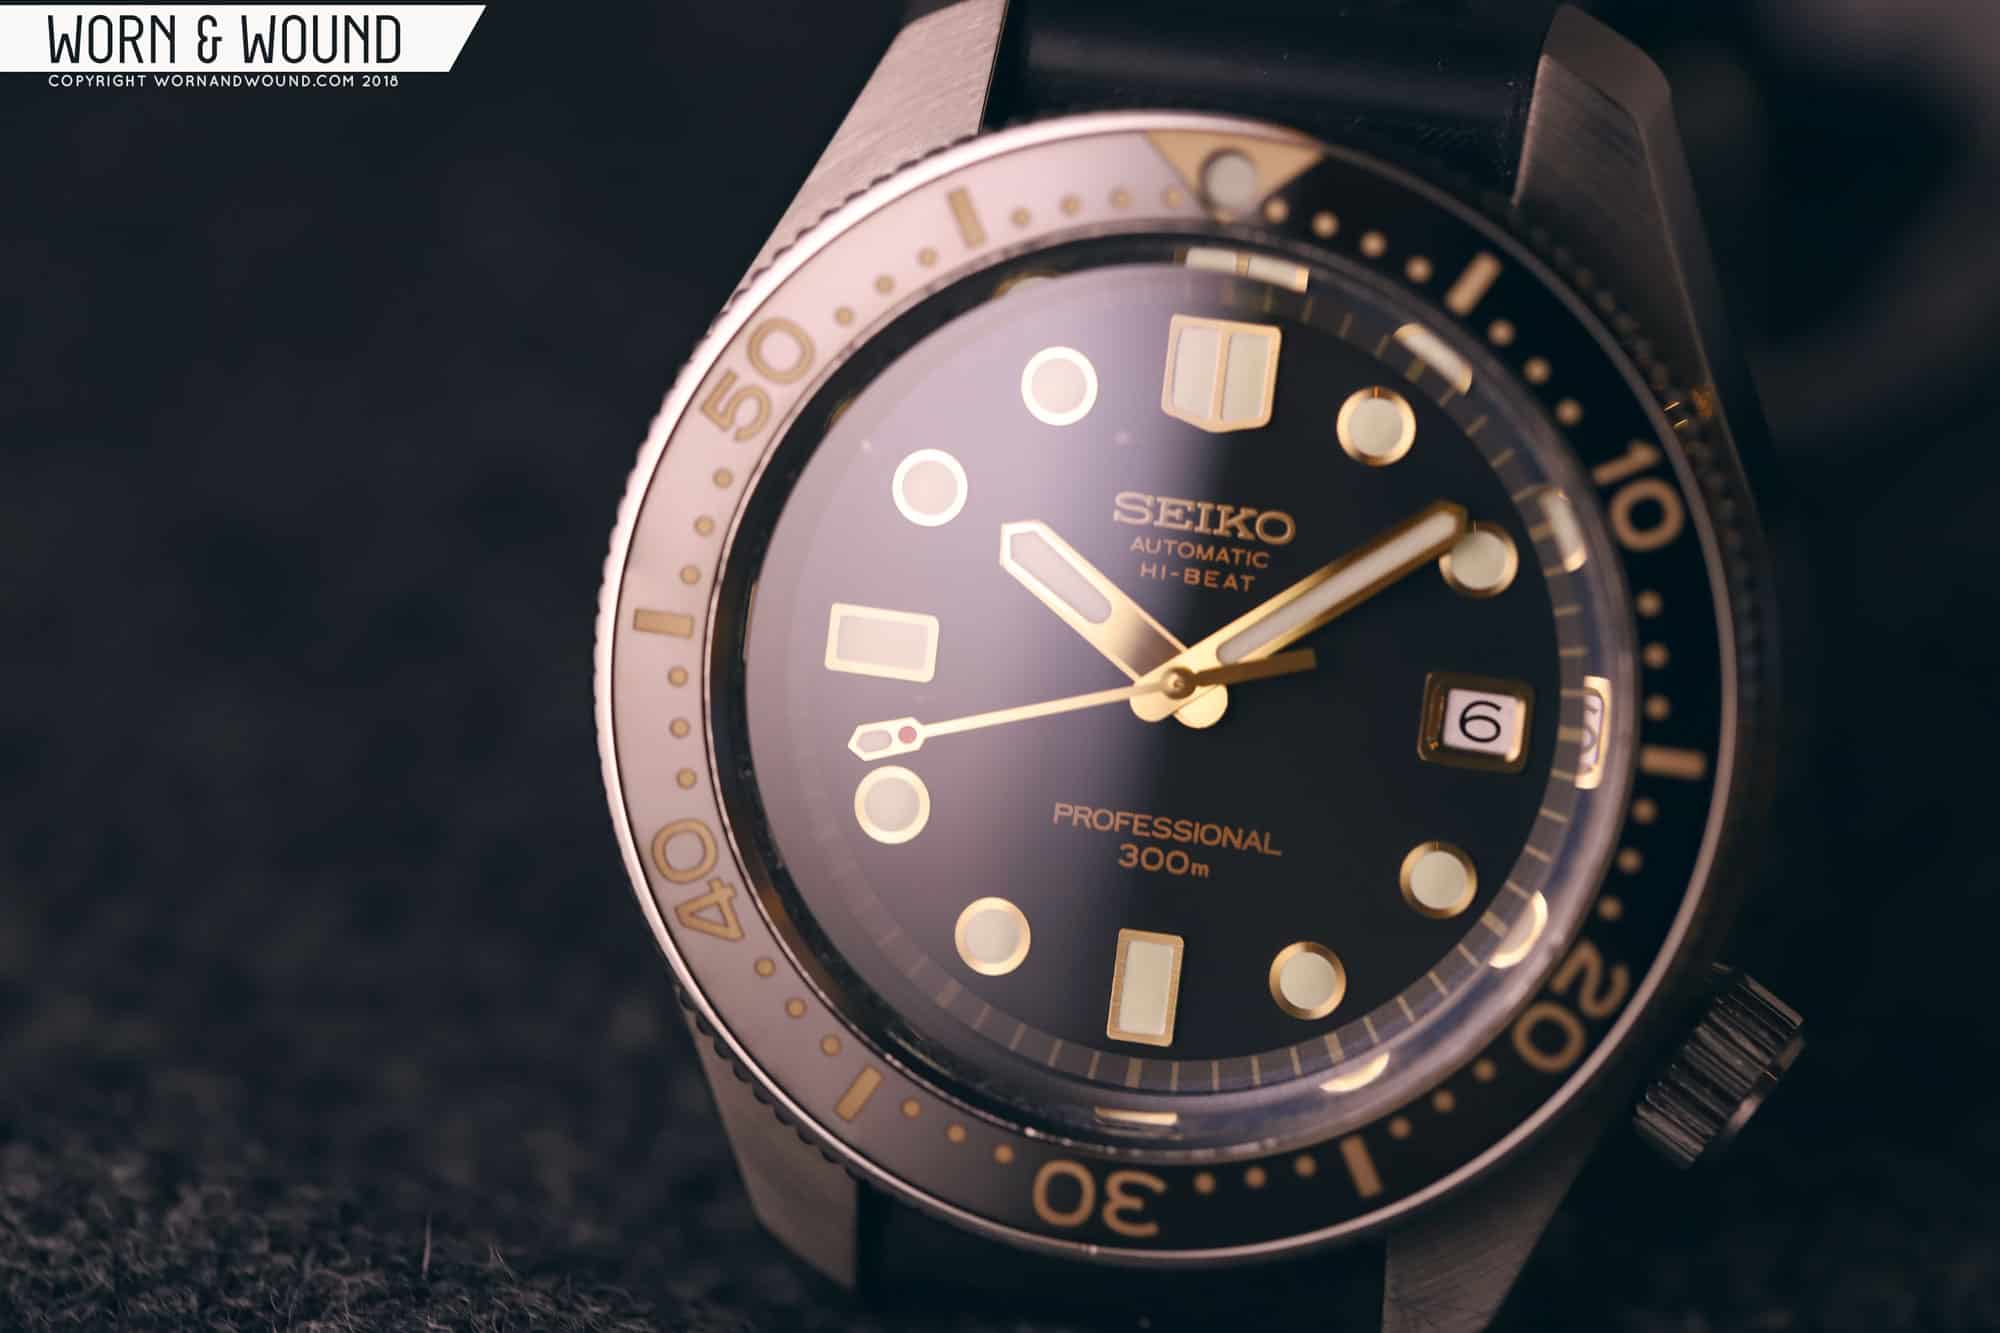 Baselworld 2018: Seiko Celebrates the 50th Anniversary of the ref. 6159-7001  With Two Hi-Beat Divers, ref. SLA025 and SLA019 - Worn & Wound